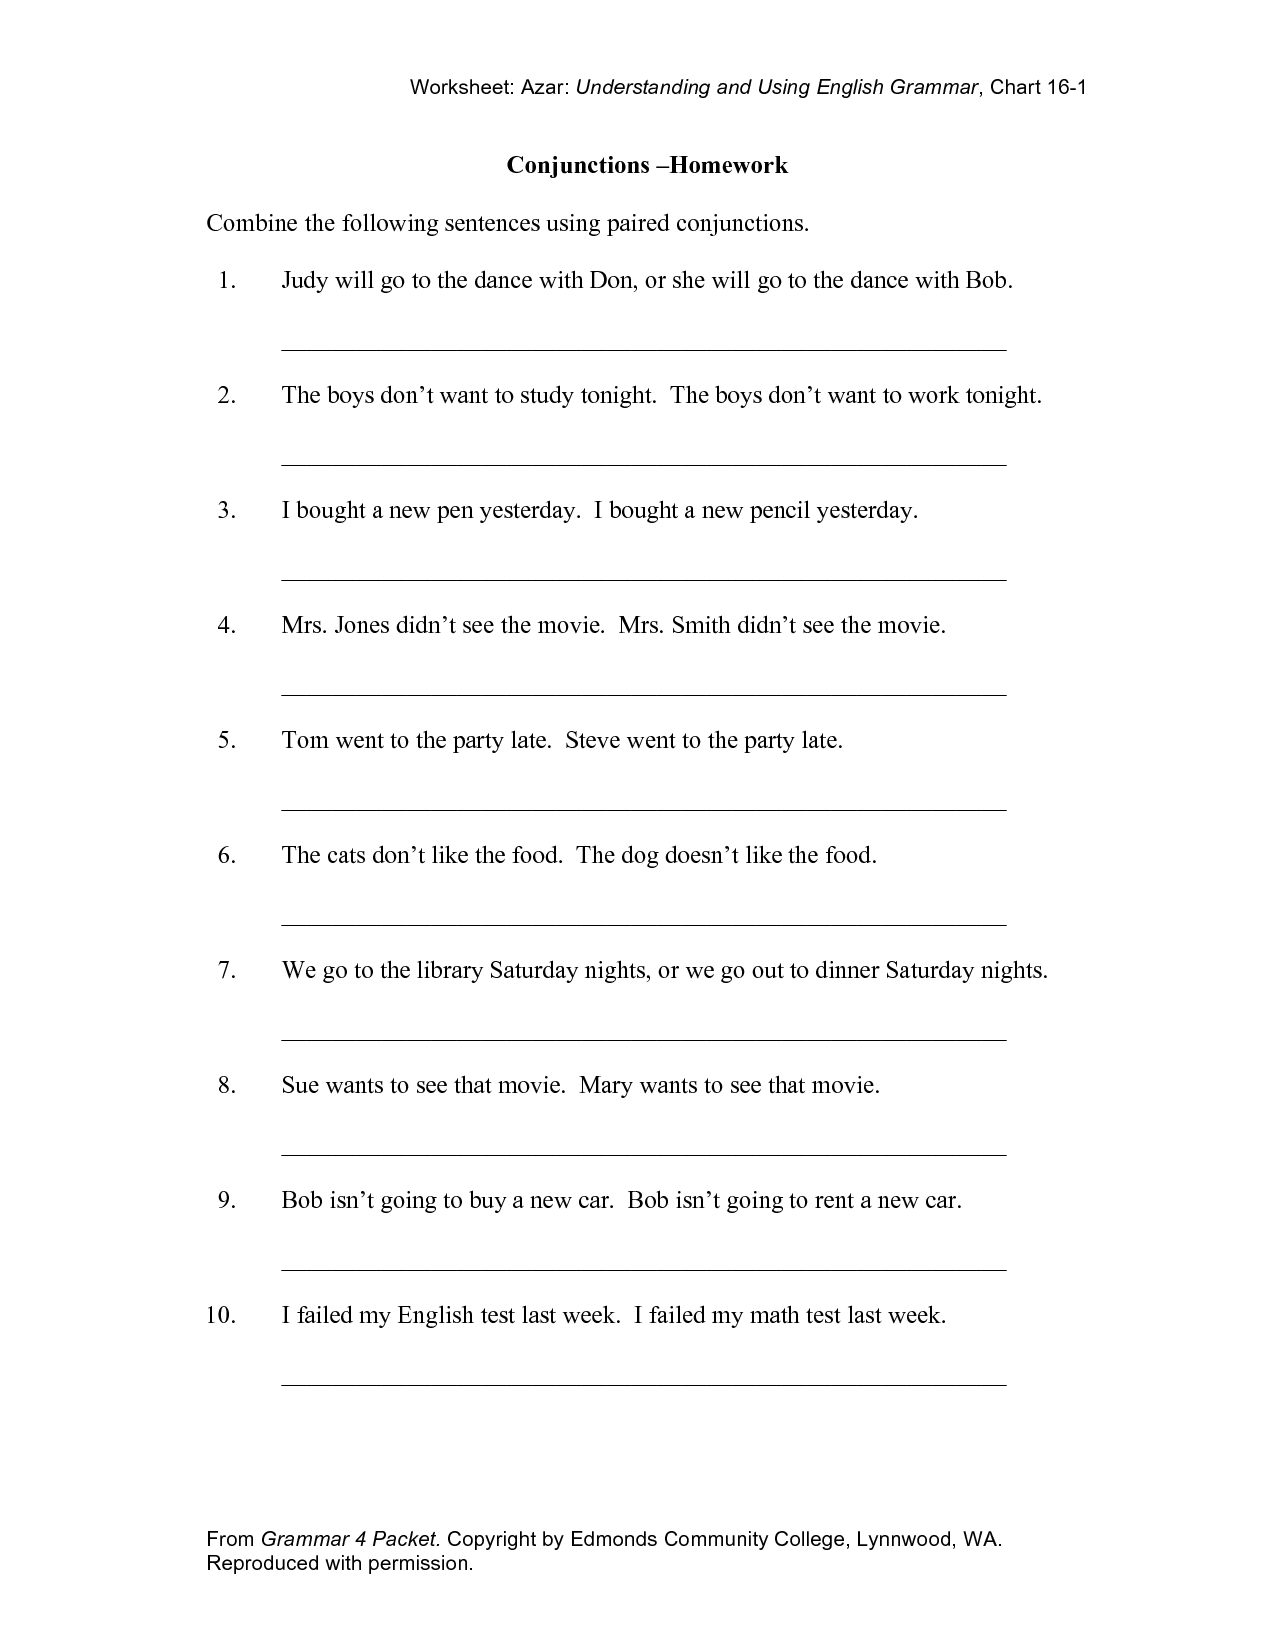 Worksheets On Combining Sentences With Conjunctions